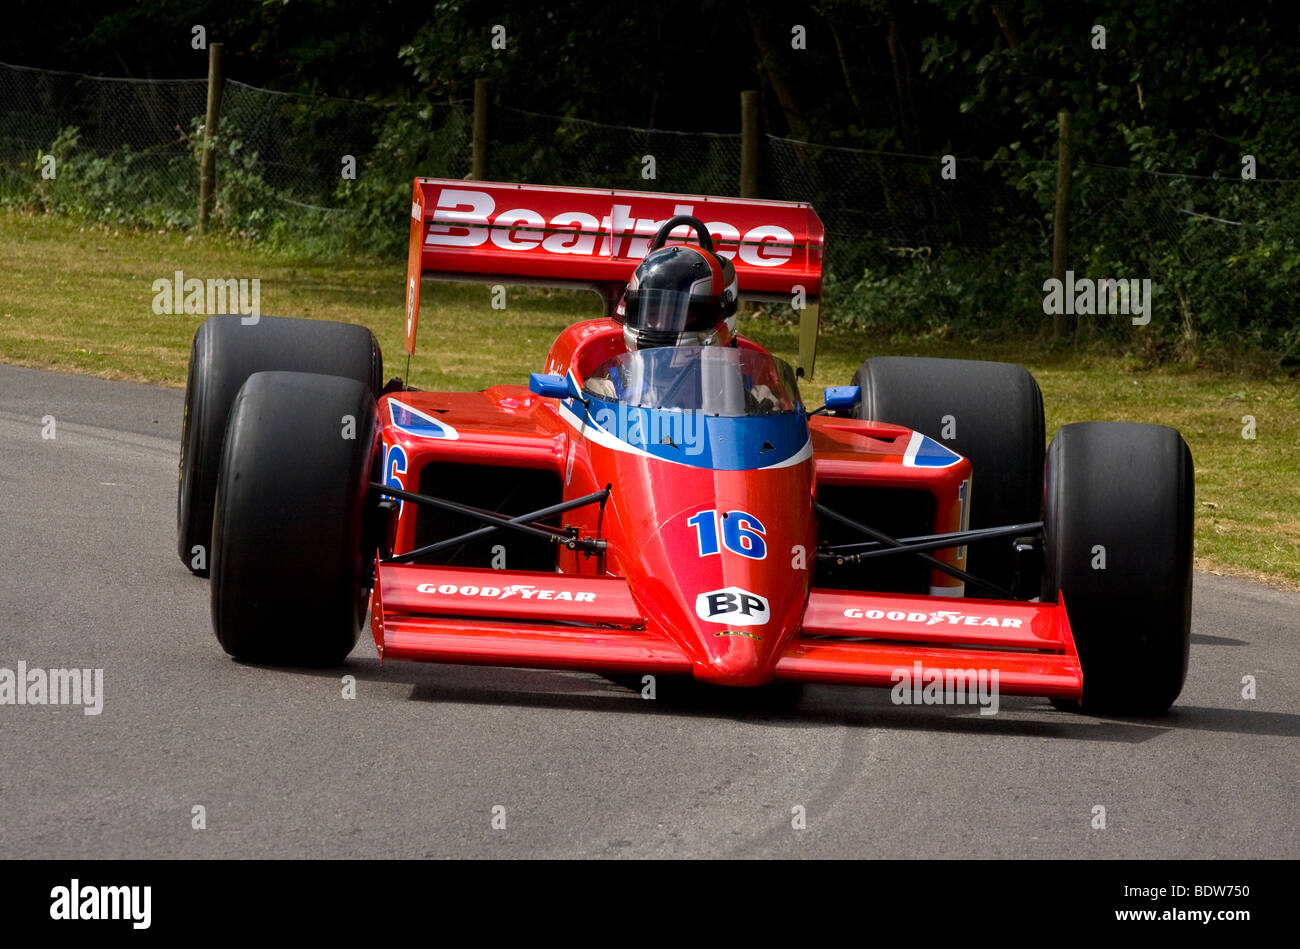 1985 Beatrice Lola-Hart THL1 GP car with driver Richard Meins at Goodwood Festival of Speed, Sussex, UK. Stock Photo